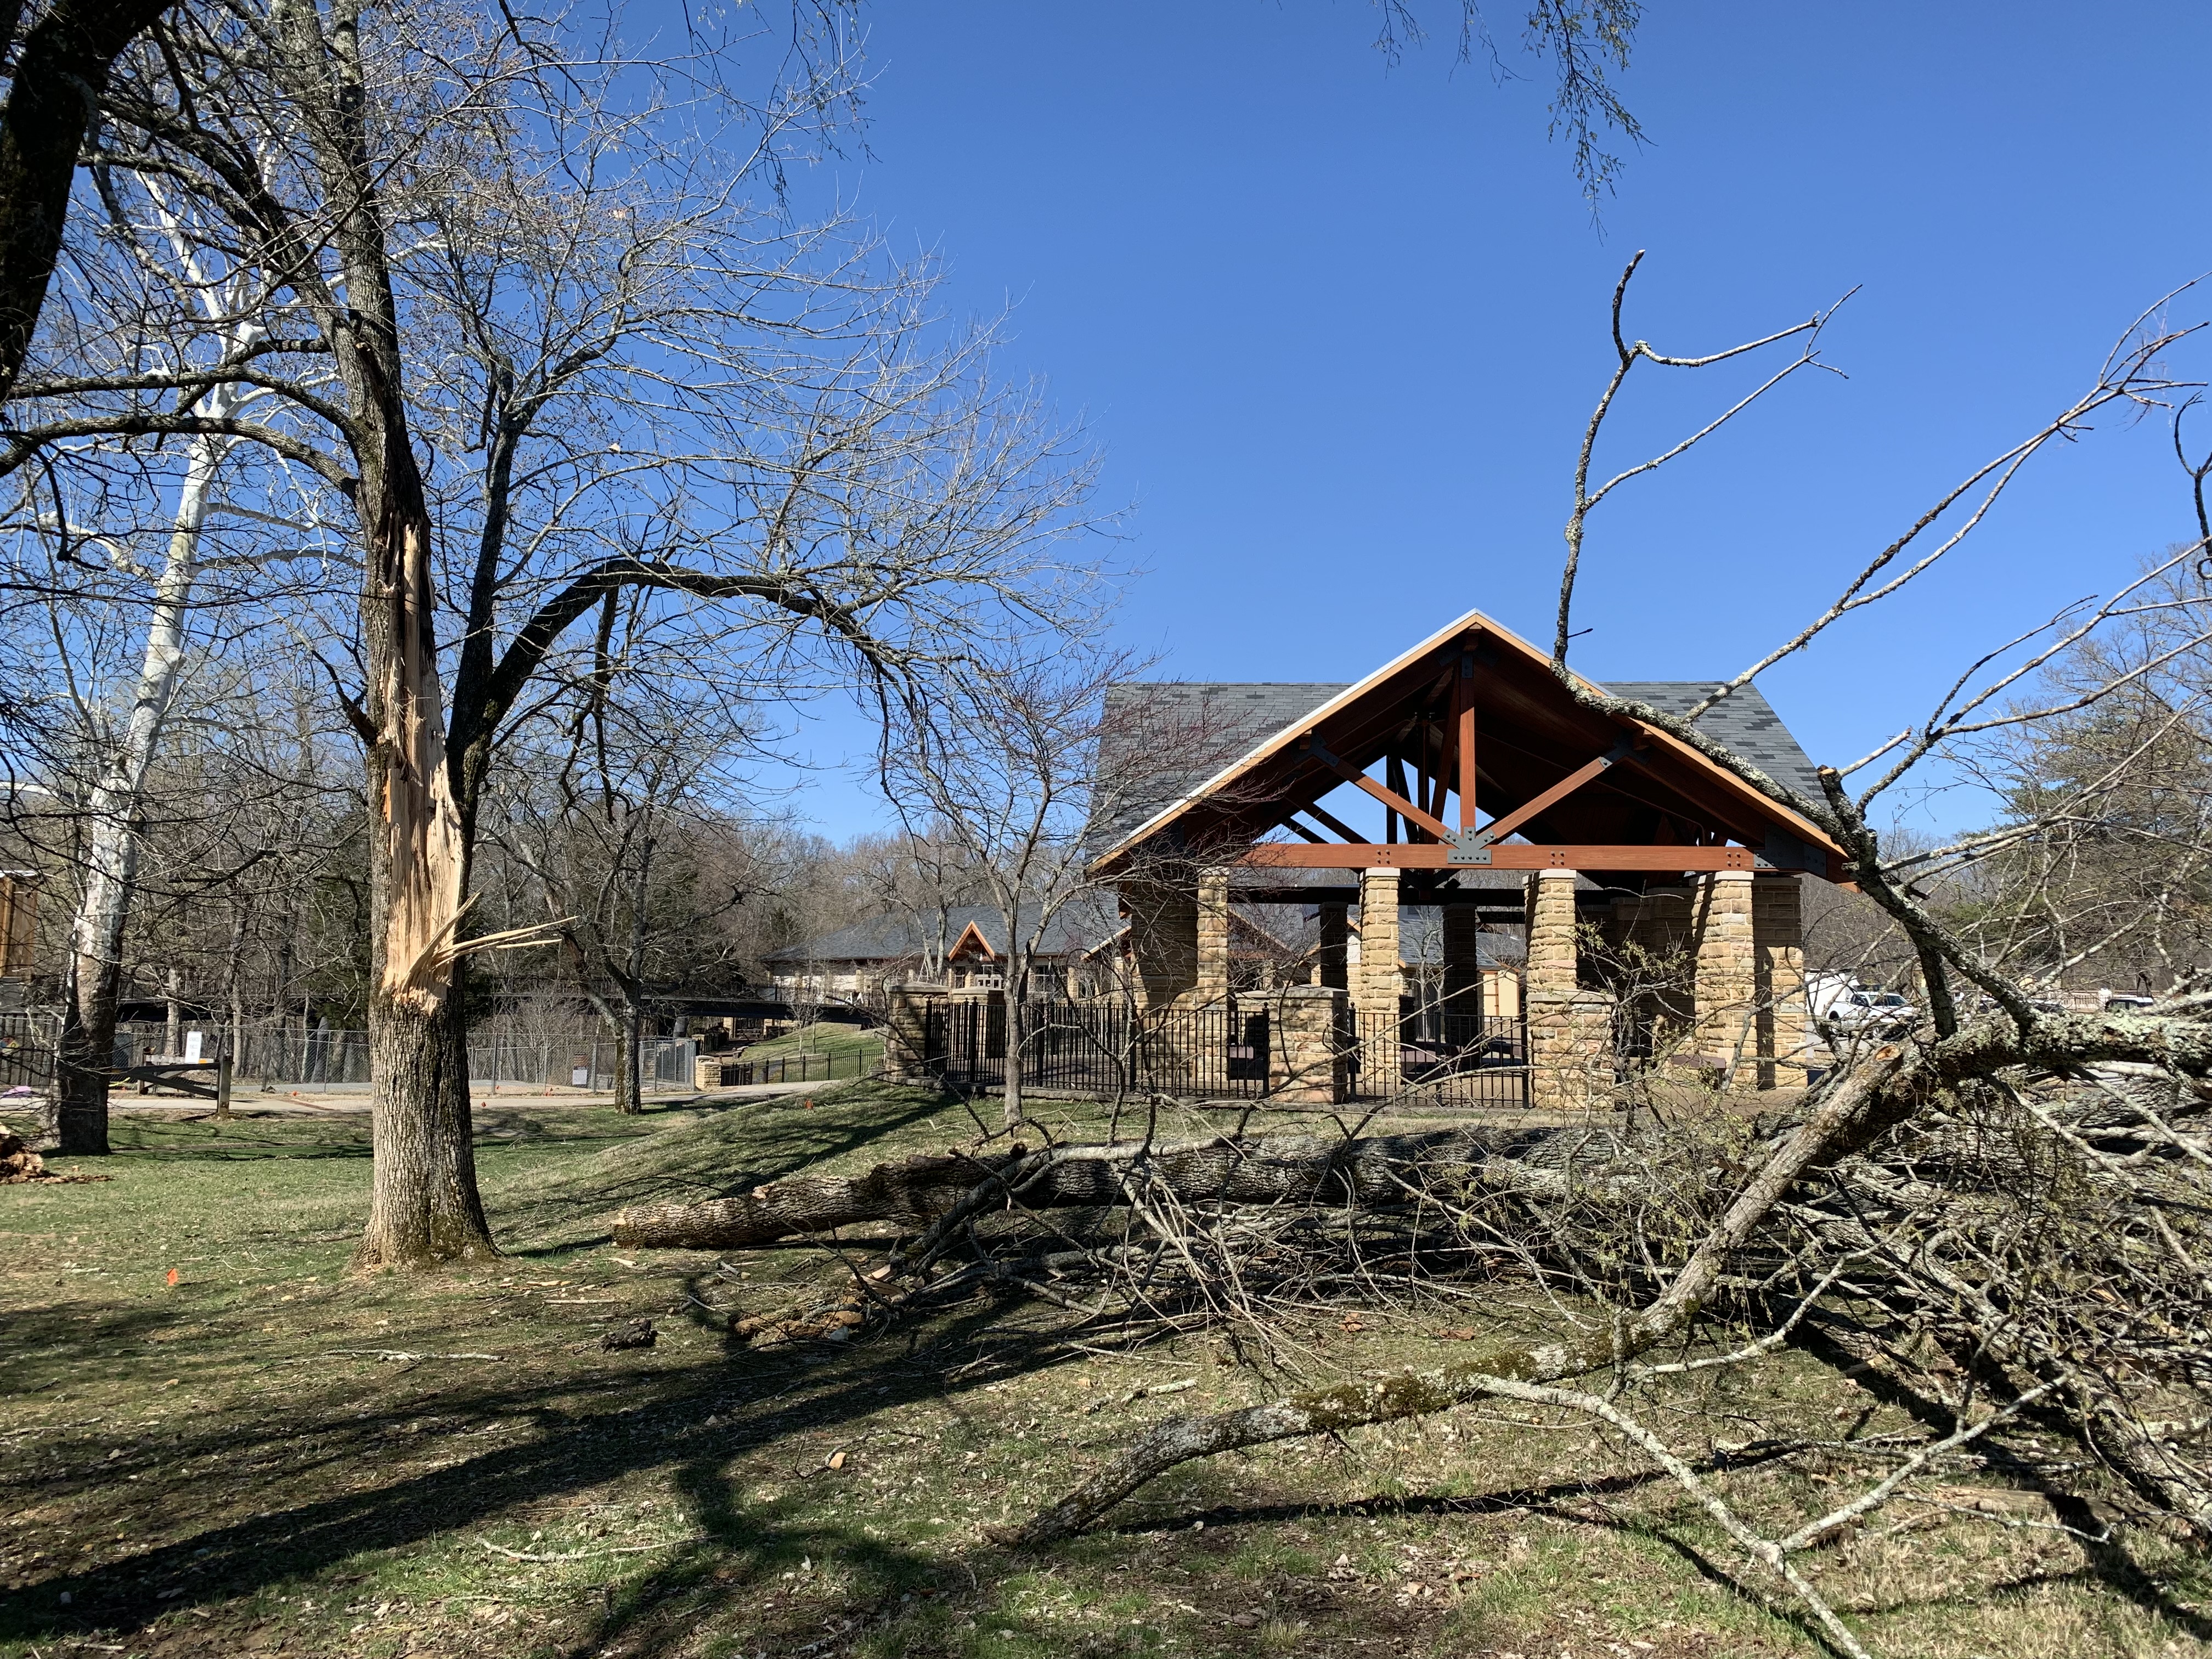 A large fallen tree rests on the ground in front of a stone building.